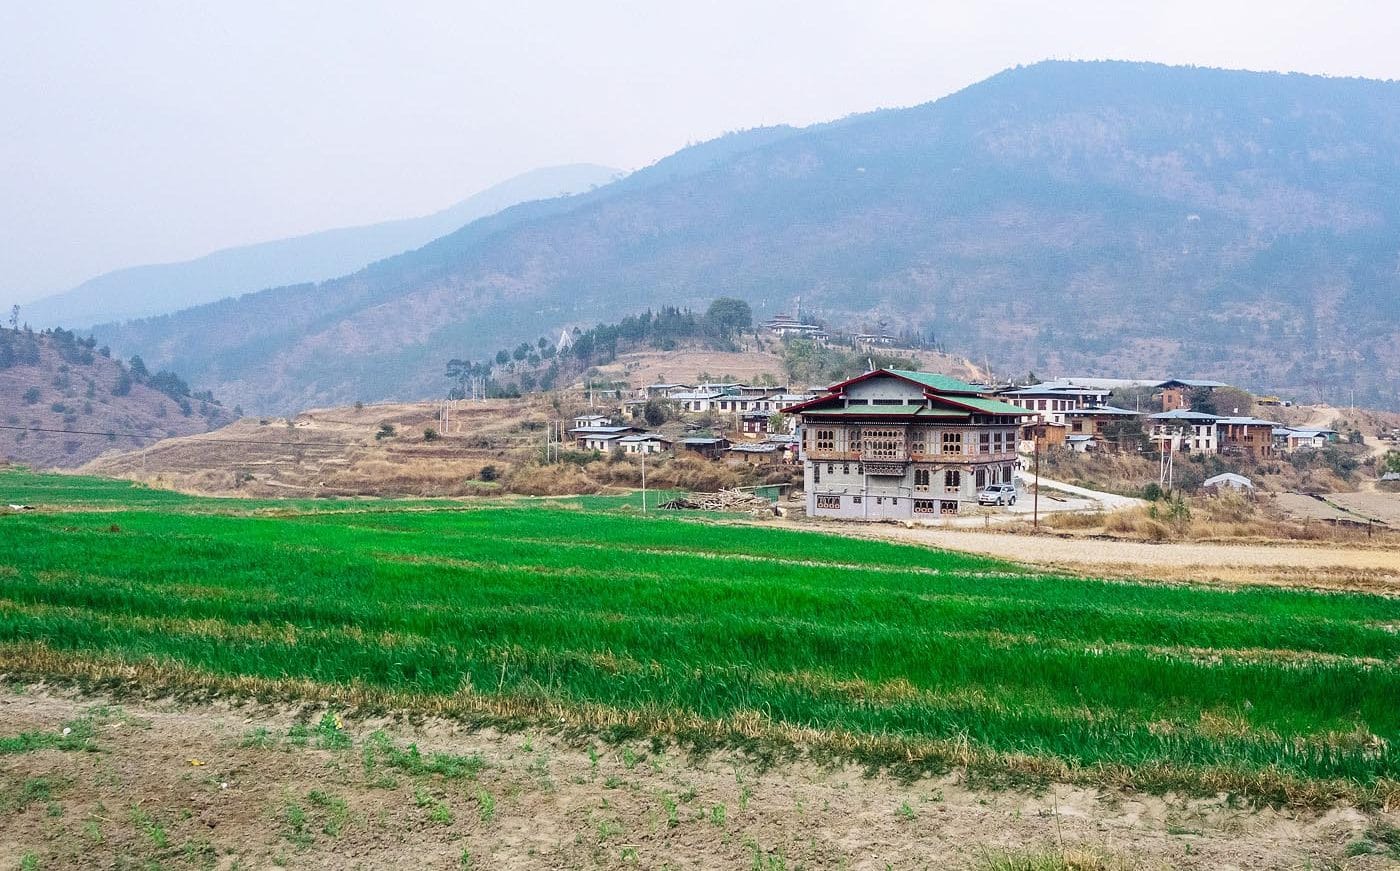 Rice paddy field on the way to Sopsokha villlage